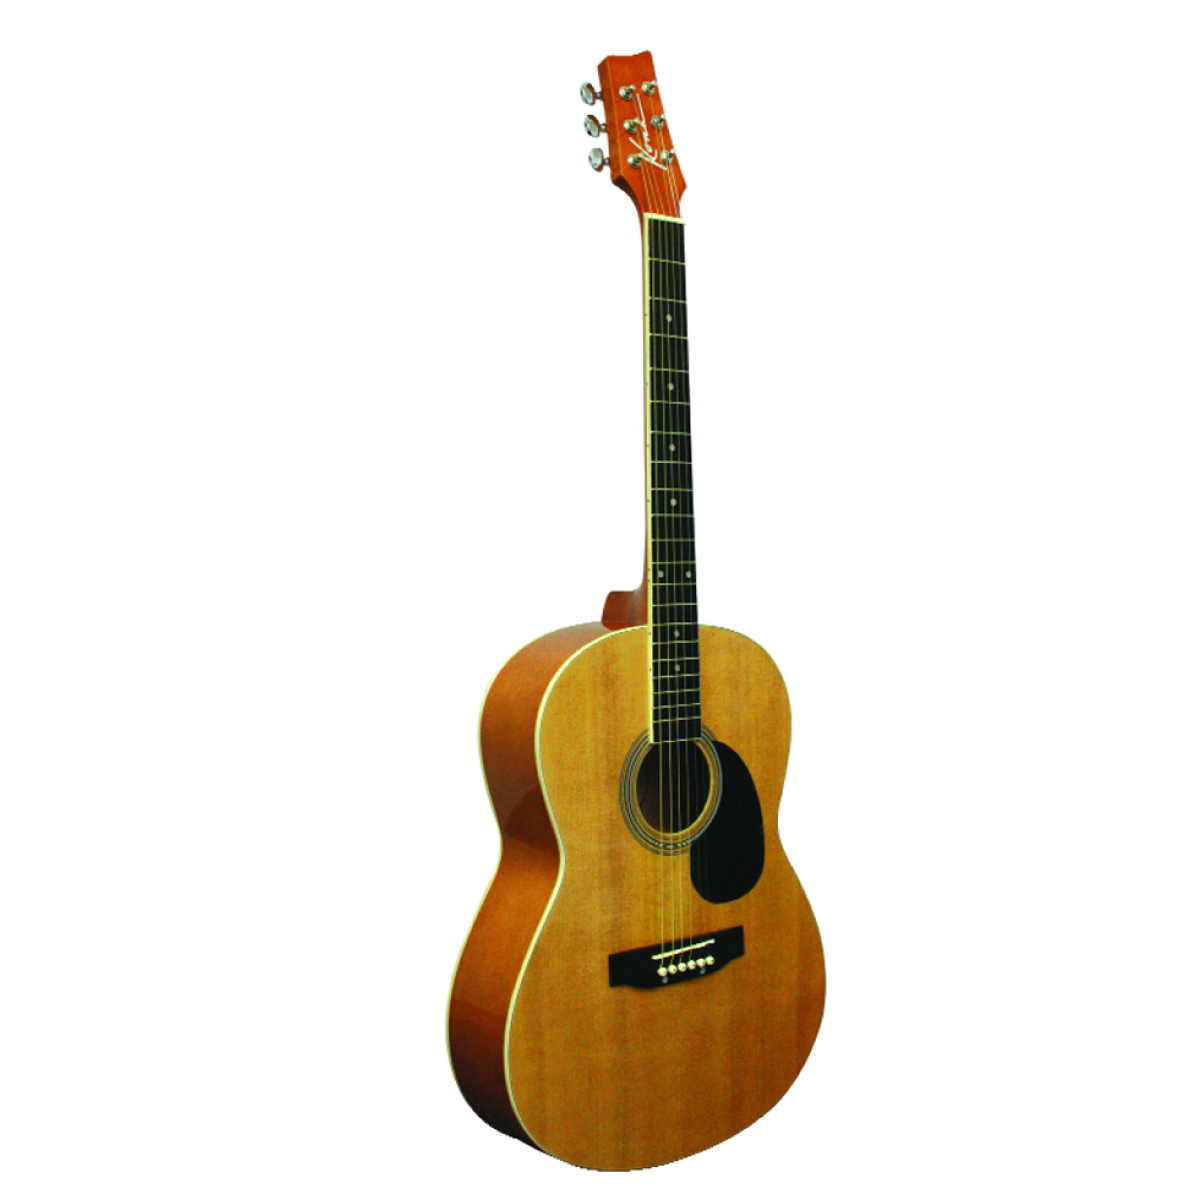 Kona Thin Body 41in Acoustic Guitar with Spruce Top and Rosewood Body in High-Gloss Finish